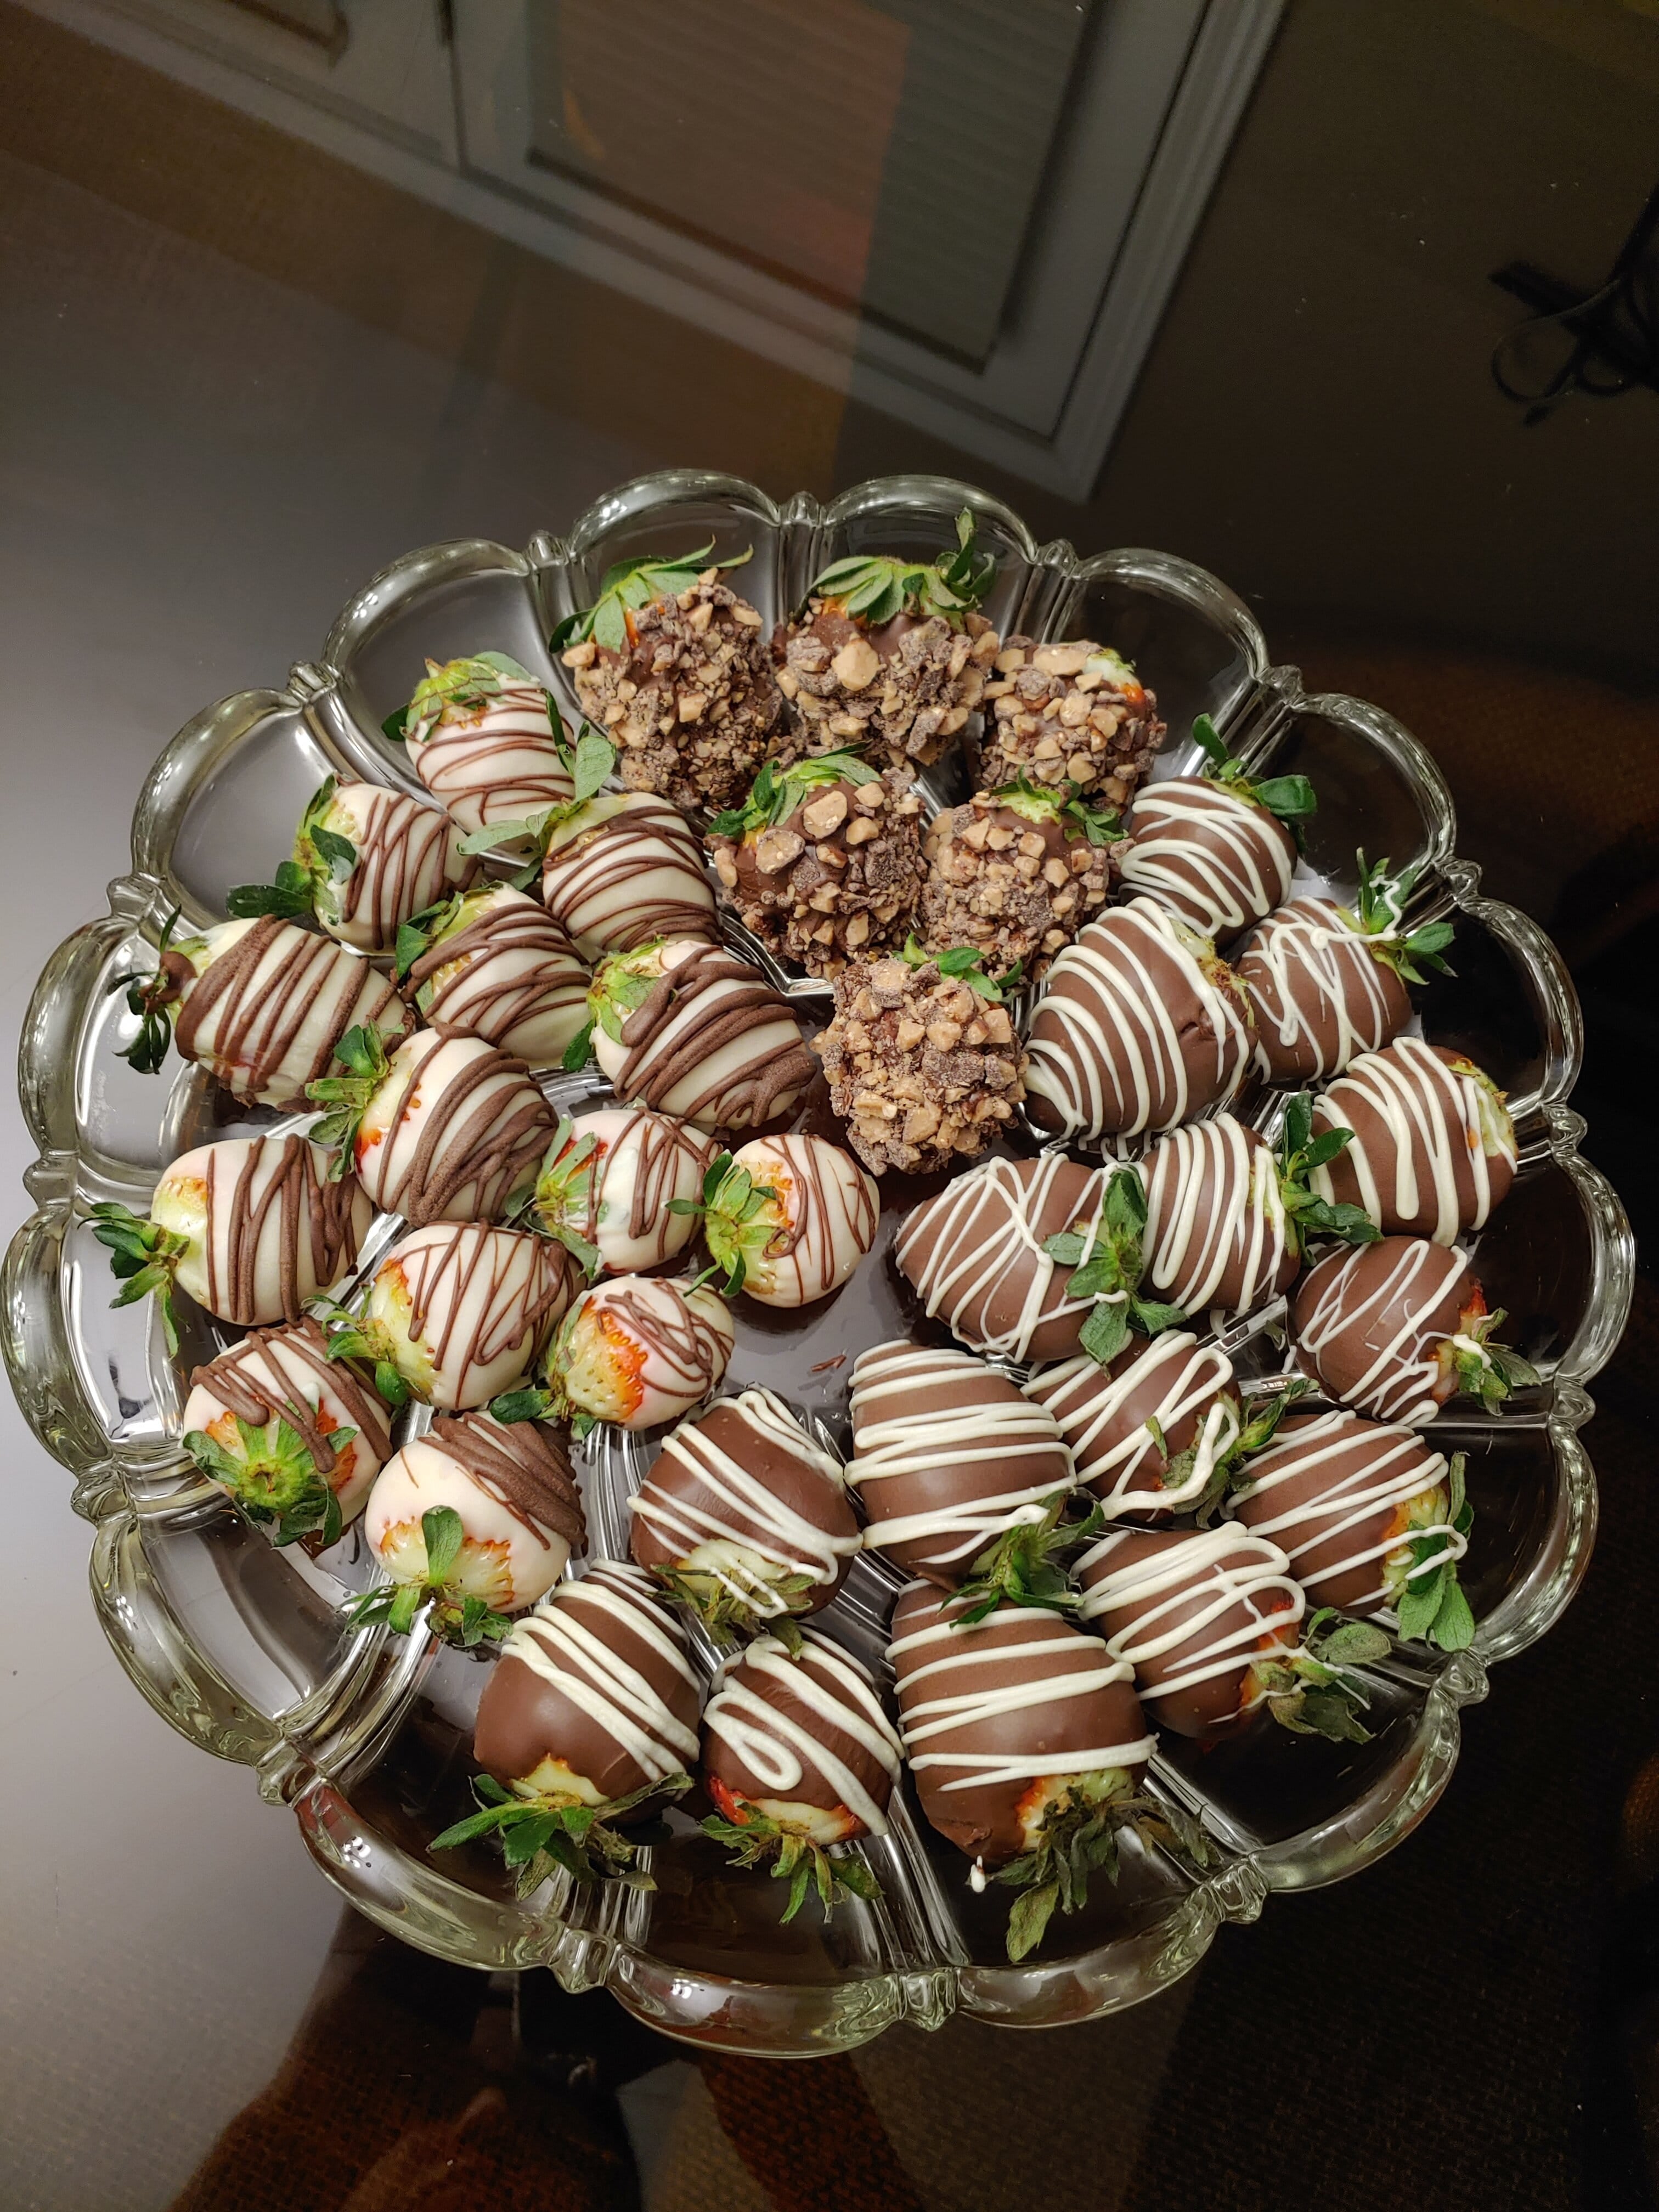 Frannie's Specialty - Chocolate Covered Strawberries